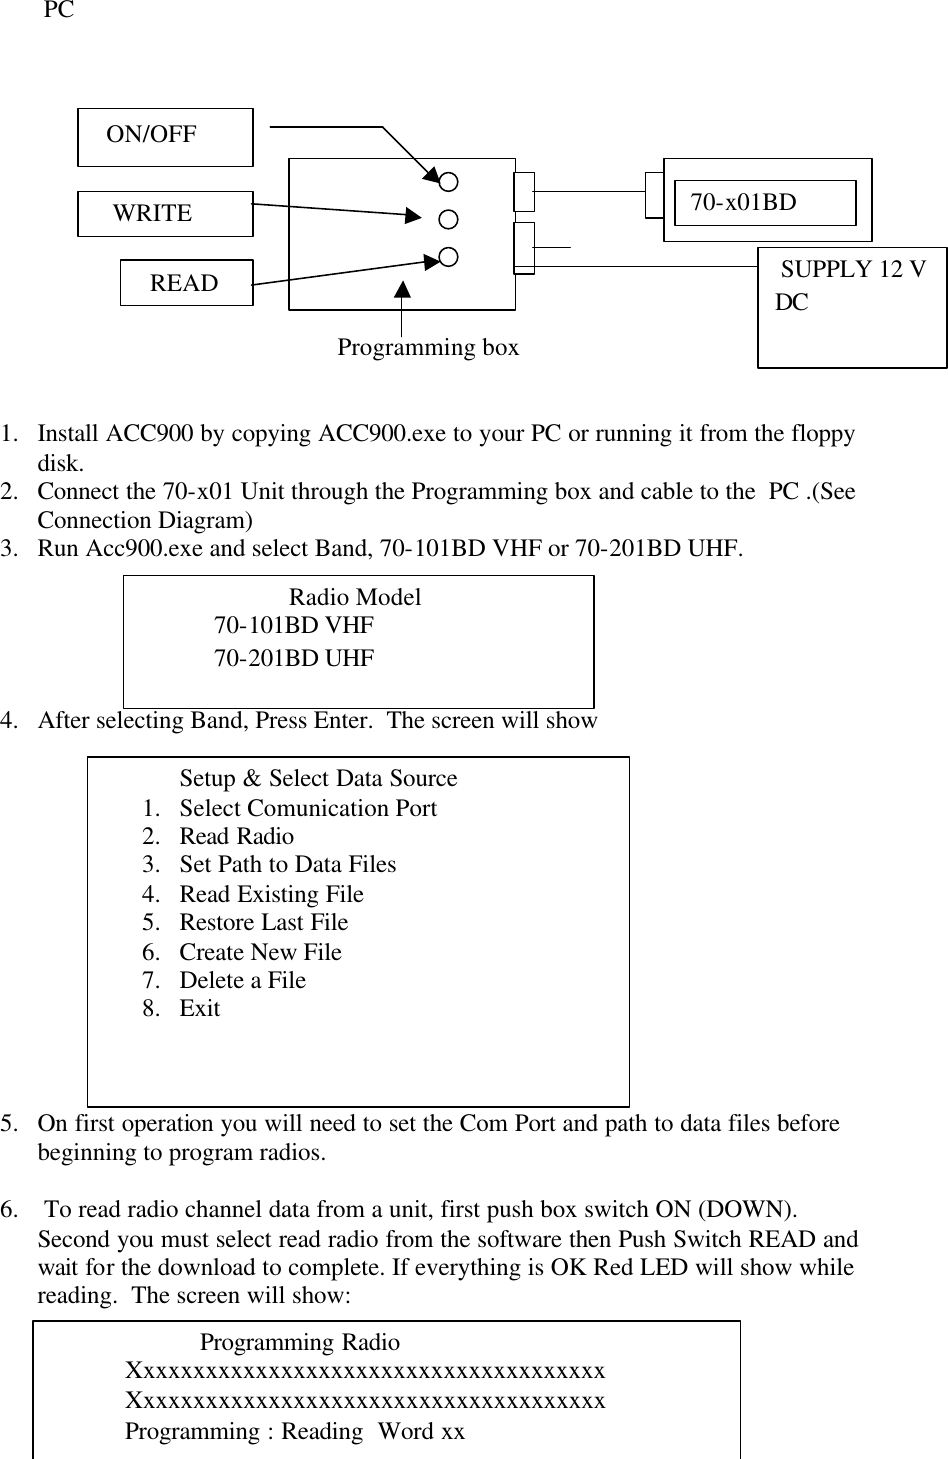 7              PC                                                                                                                                                                                  Programming box   1.  Install ACC900 by copying ACC900.exe to your PC or running it from the floppy disk. 2.  Connect the 70-x01 Unit through the Programming box and cable to the  PC .(See Connection Diagram) 3.  Run Acc900.exe and select Band, 70-101BD VHF or 70-201BD UHF.       4.  After selecting Band, Press Enter.  The screen will show               5.  On first operation you will need to set the Com Port and path to data files before beginning to program radios.  6.   To read radio channel data from a unit, first push box switch ON (DOWN). Second you must select read radio from the software then Push Switch READ and wait for the download to complete. If everything is OK Red LED will show while reading.  The screen will show:  70-x01BD  SUPPLY 12 V DC   ON/OFF    WRITE   READ   Radio Model   70-101BD VHF   70-201BD UHF  Setup &amp; Select Data Source 1.  Select Comunication Port 2.  Read Radio 3.  Set Path to Data Files 4.  Read Existing File 5.  Restore Last File 6.  Create New File 7.  Delete a File 8.  Exit      Programming Radio Xxxxxxxxxxxxxxxxxxxxxxxxxxxxxxxxxxxxxx Xxxxxxxxxxxxxxxxxxxxxxxxxxxxxxxxxxxxxx Programming : Reading  Word xx 